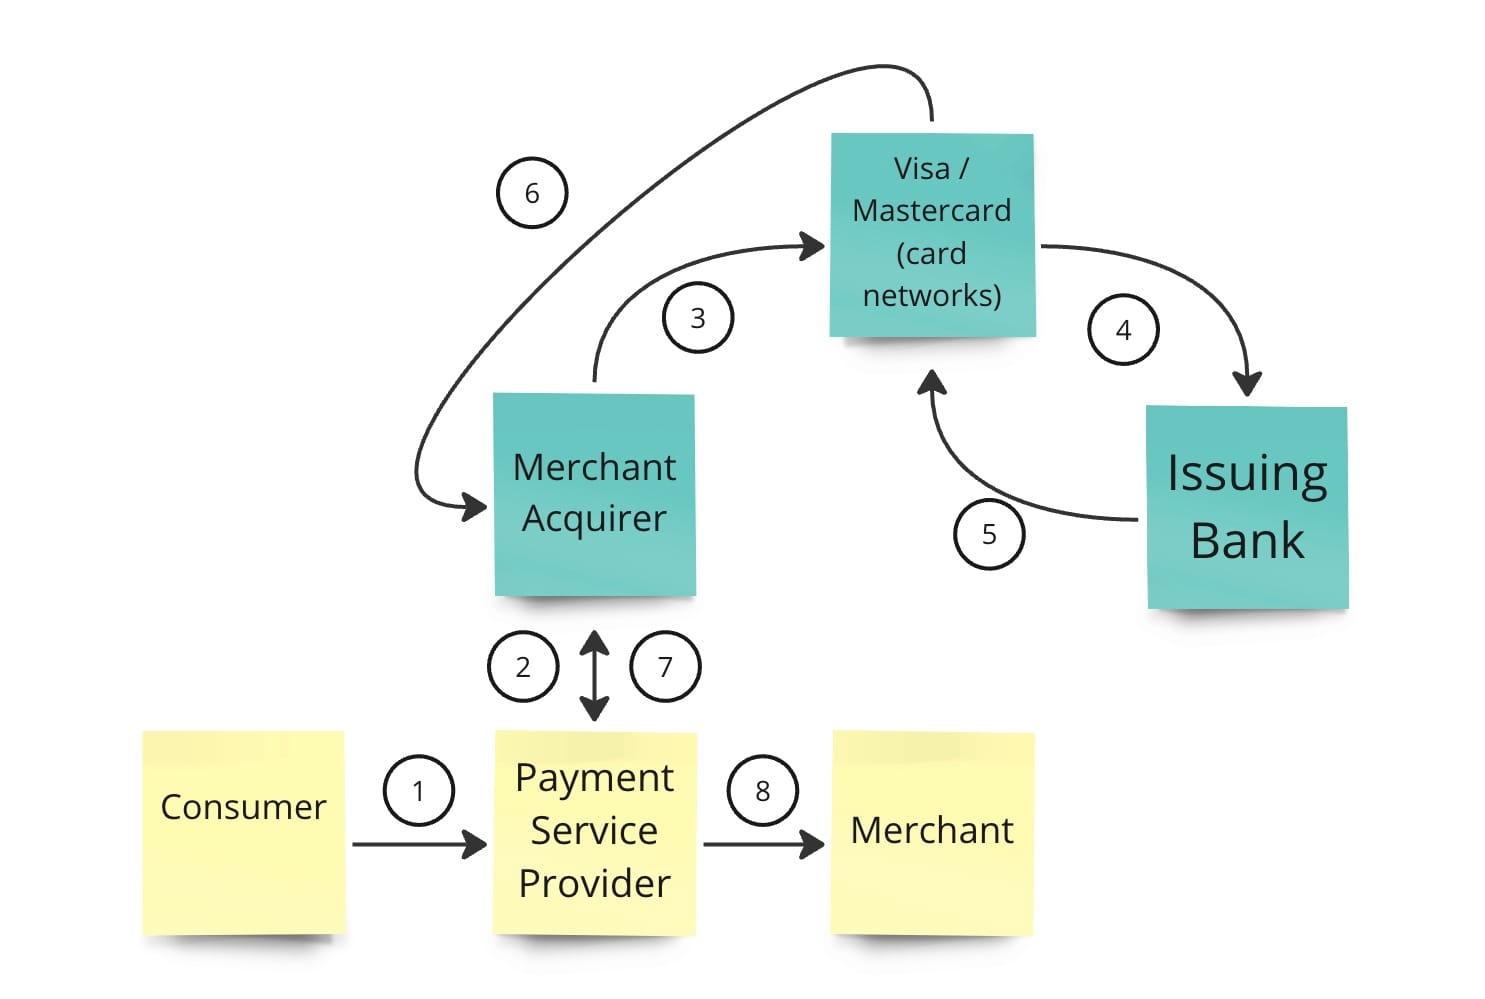 How payments flow from a consumer to the merchant